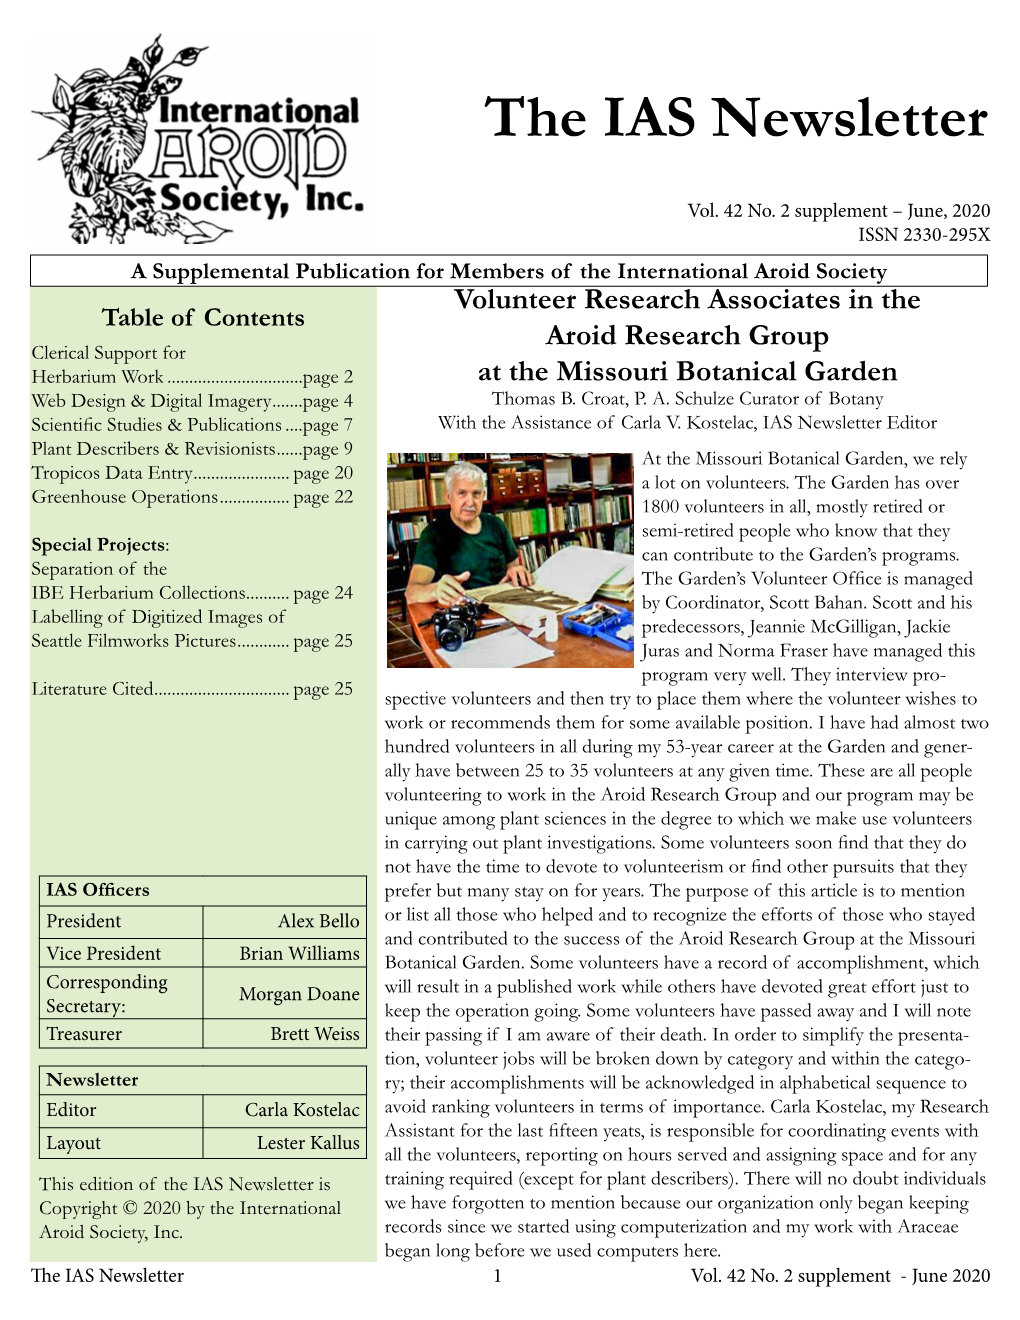 Volunteer Research Associates in the Aroid Research Group at The